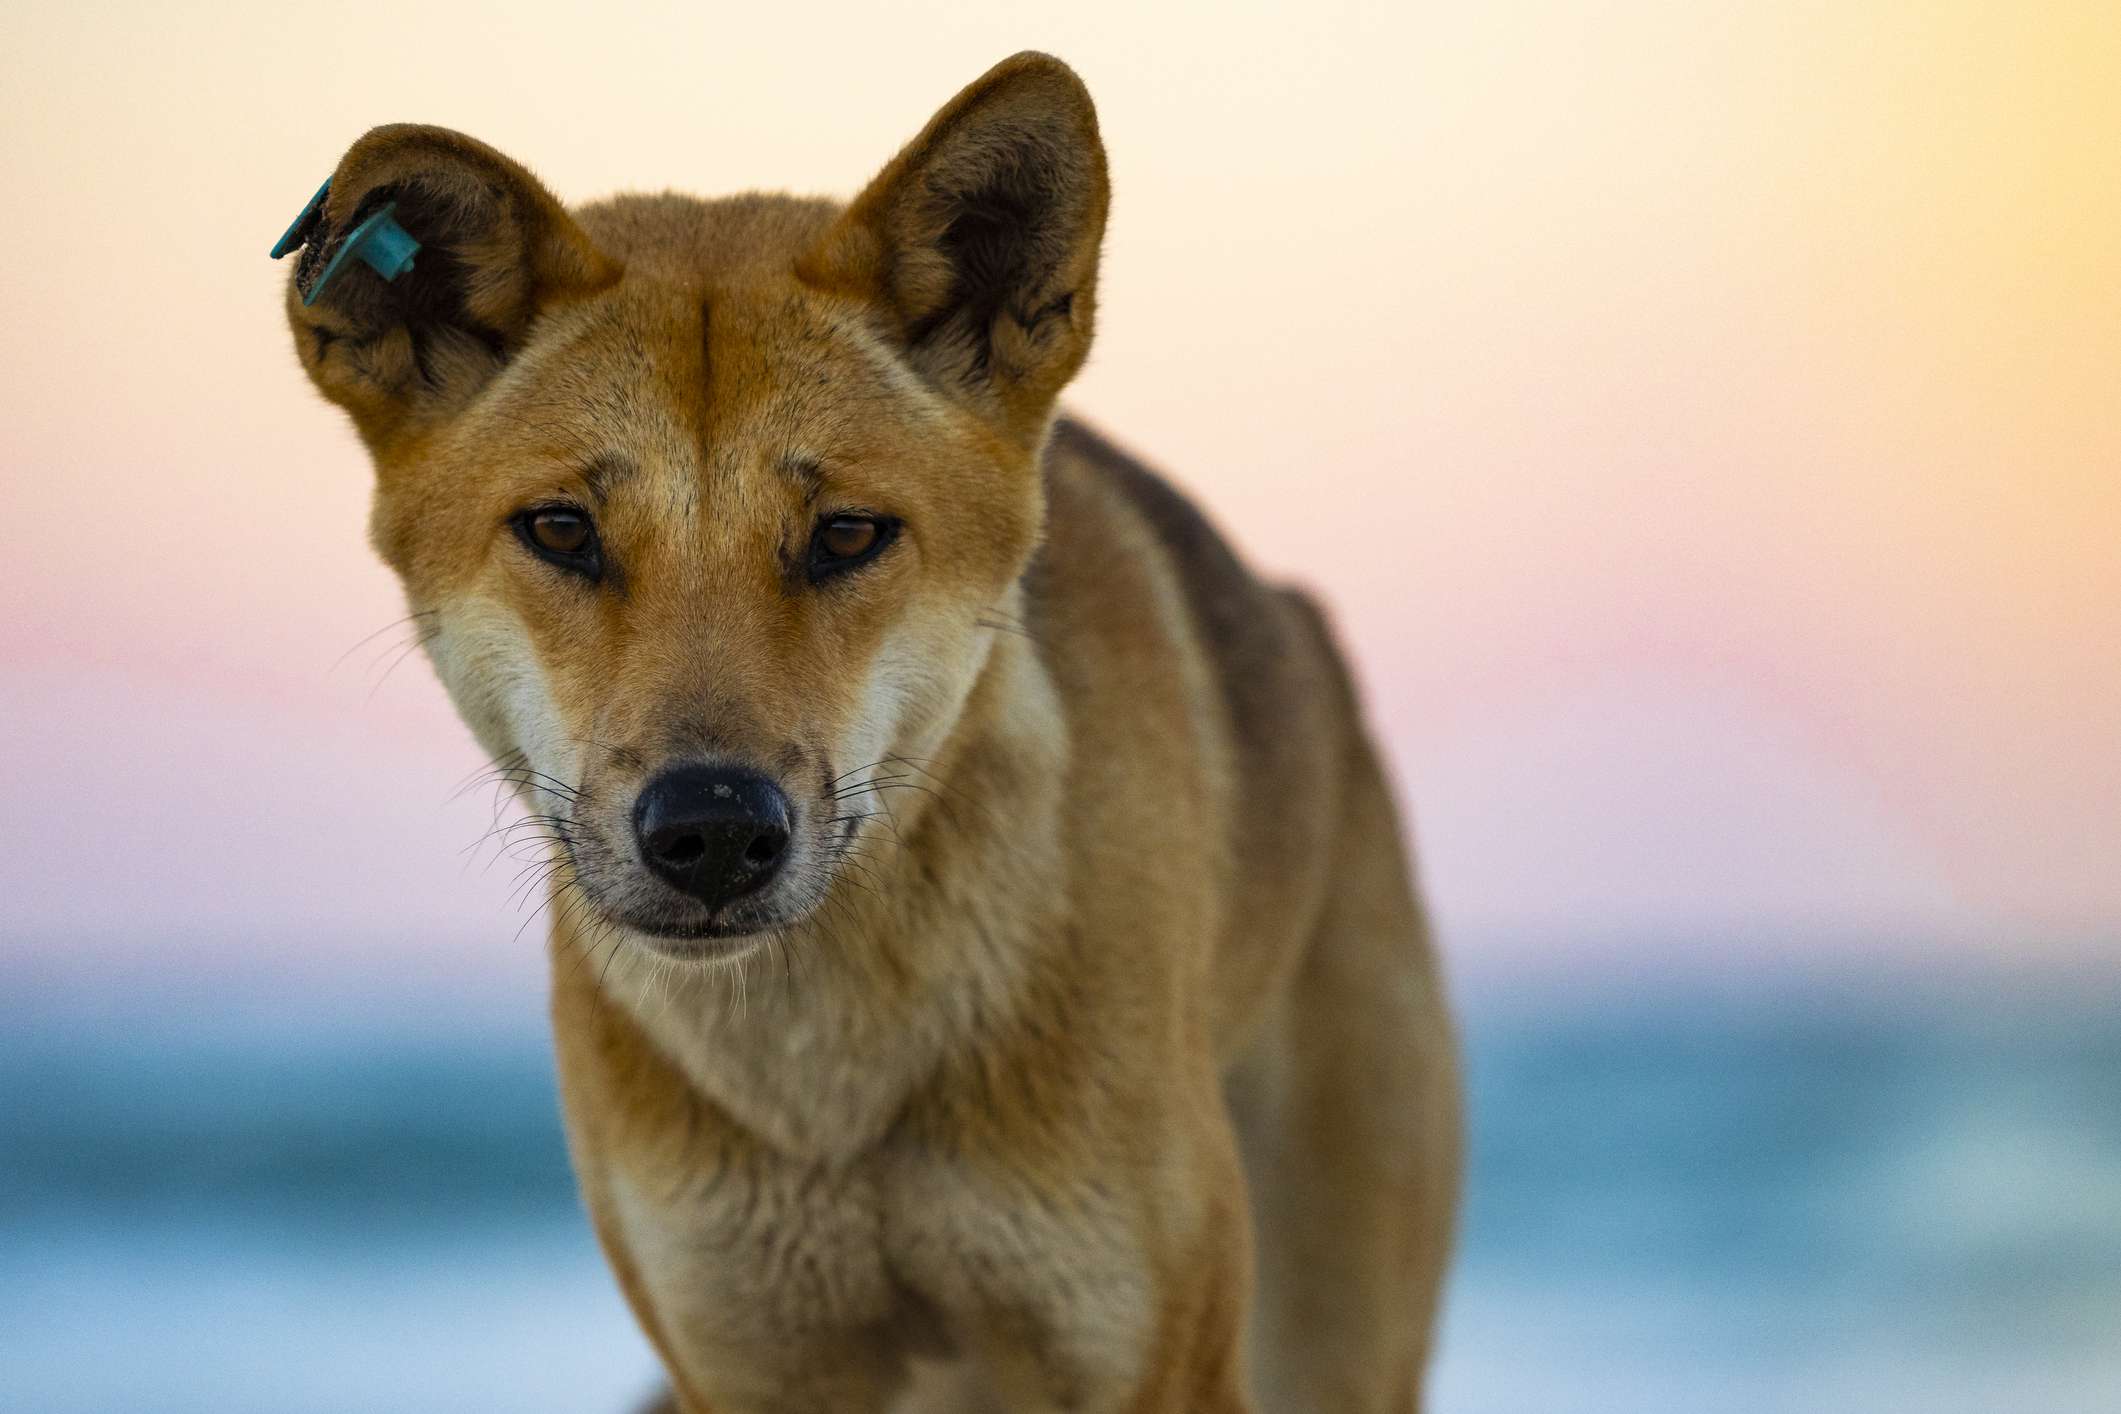 Australian Dingo profile in front of blurred sunset